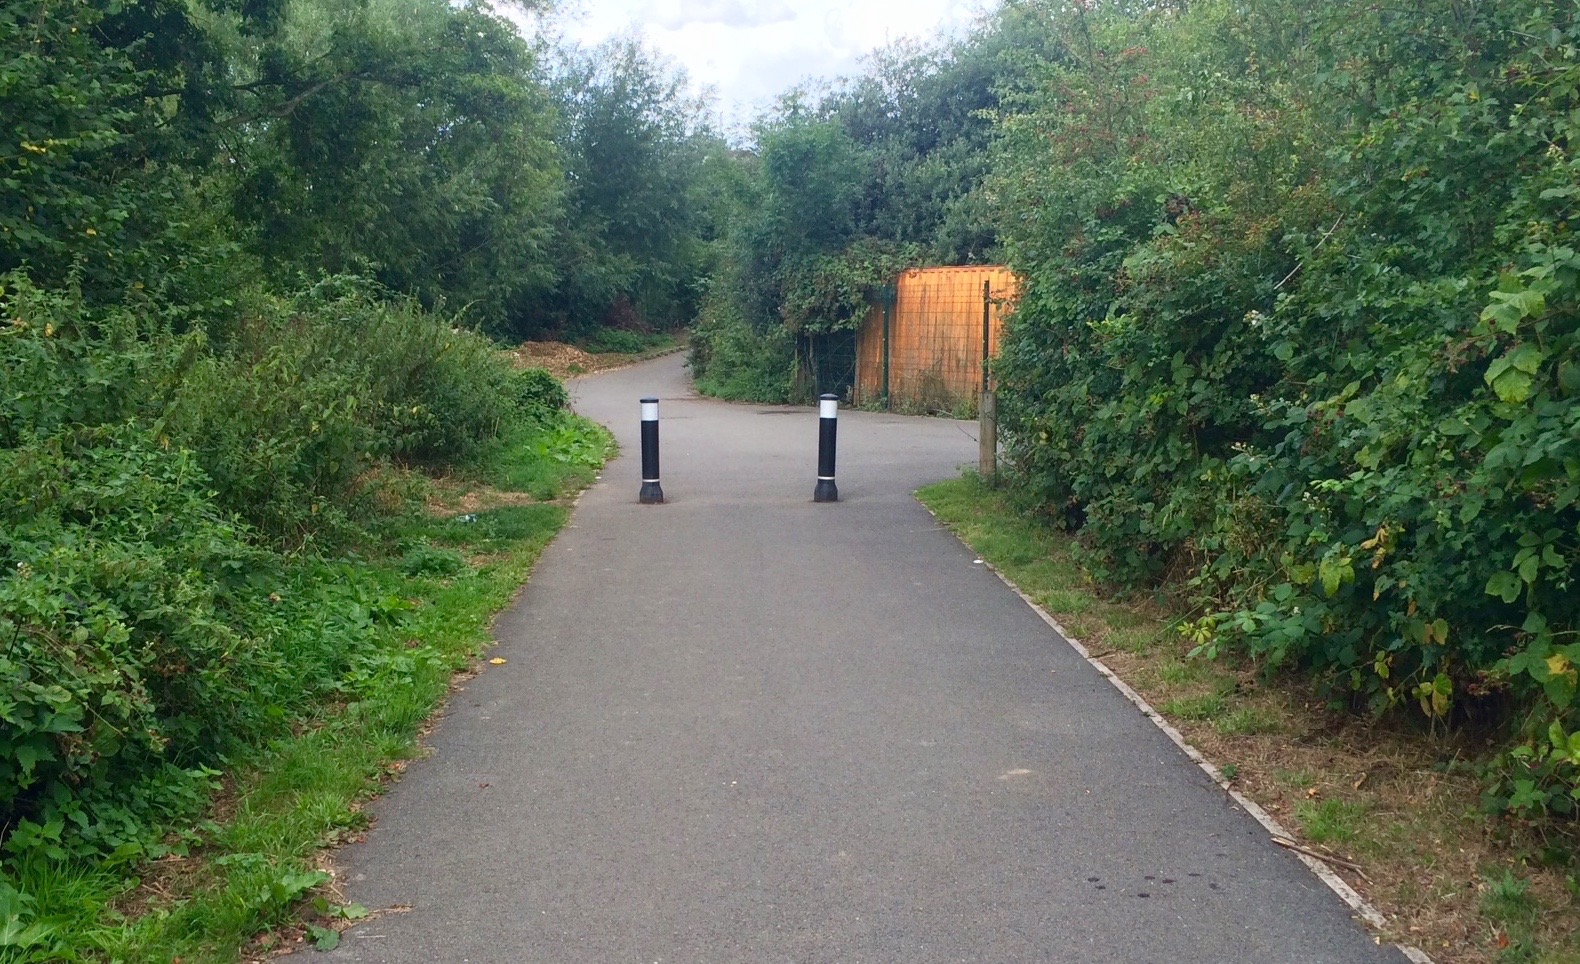 Two bollards preventing motor vehicle access to a shared use lane.